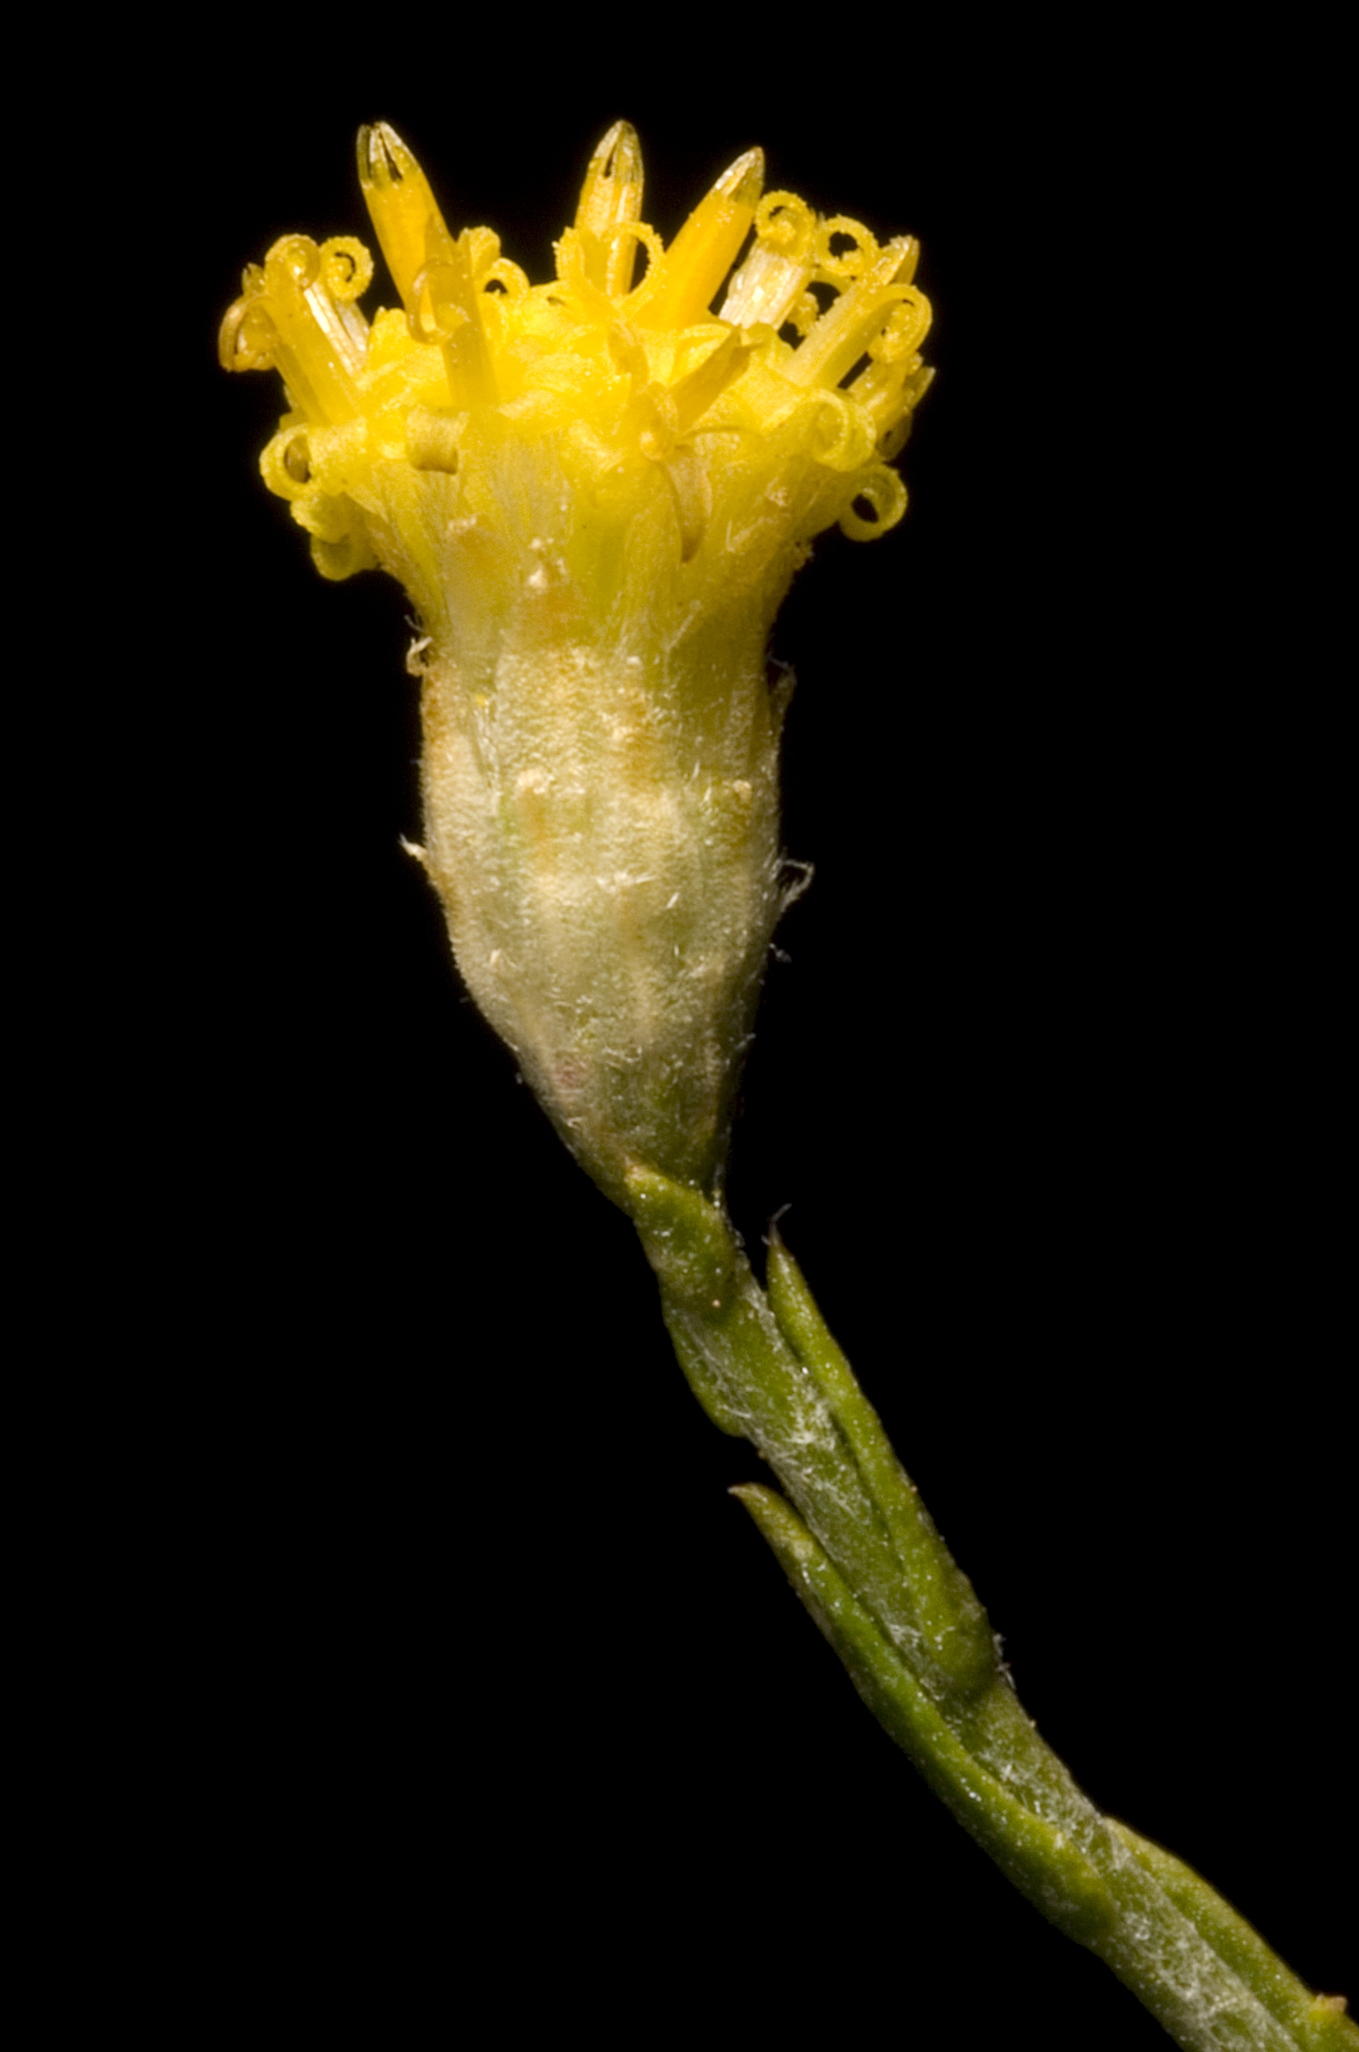 the flower of the plant is yellow in color